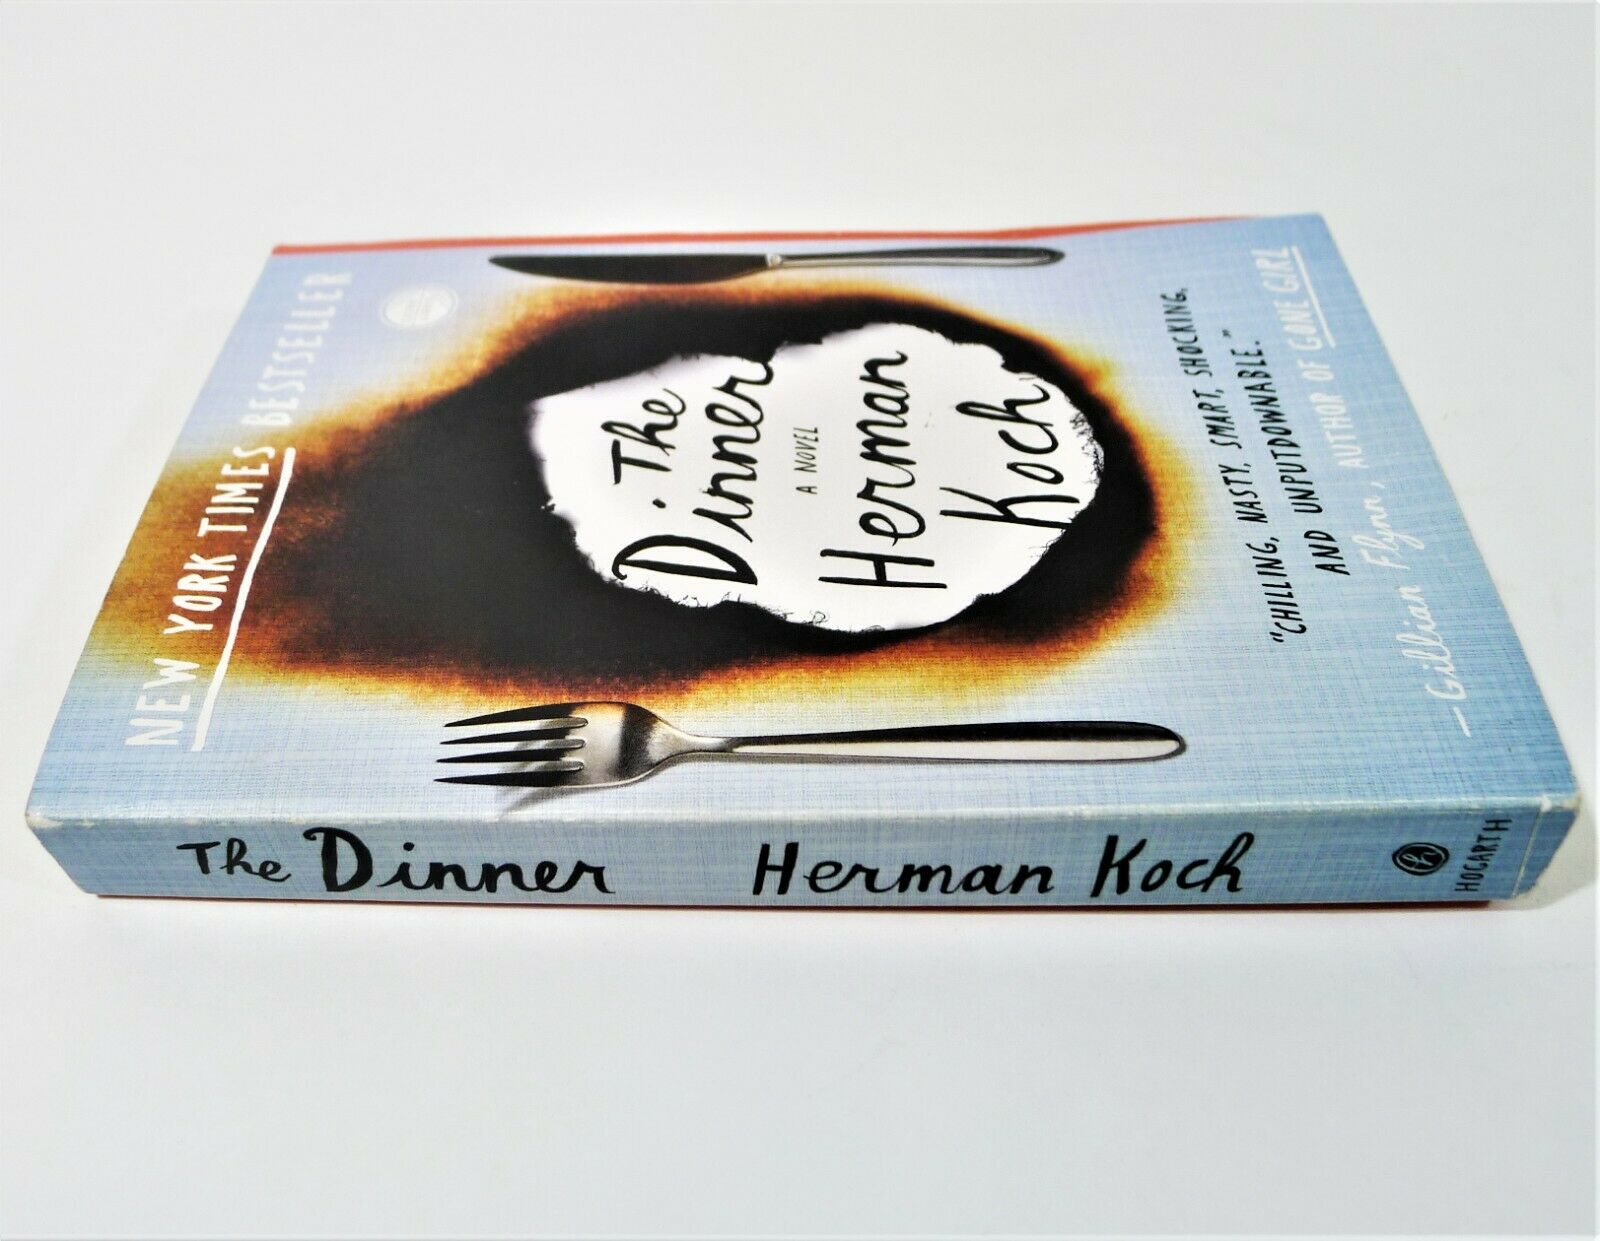 Cover of Herman Koch's The Dinner book as seen from an angle.